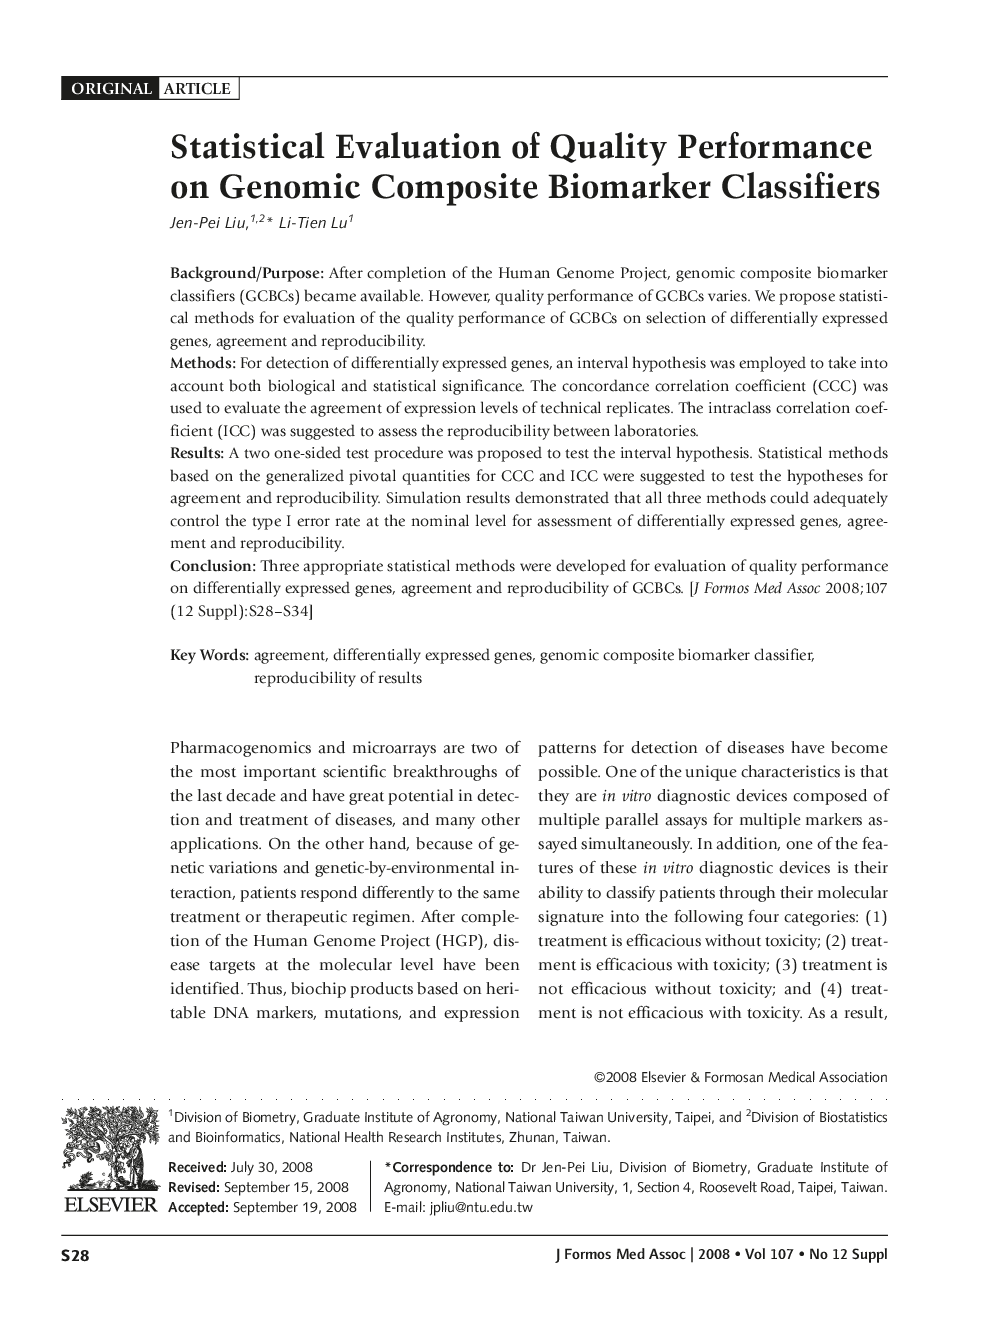 Statistical Evaluation of Quality Performance on Genomic Composite Biomarker Classifiers